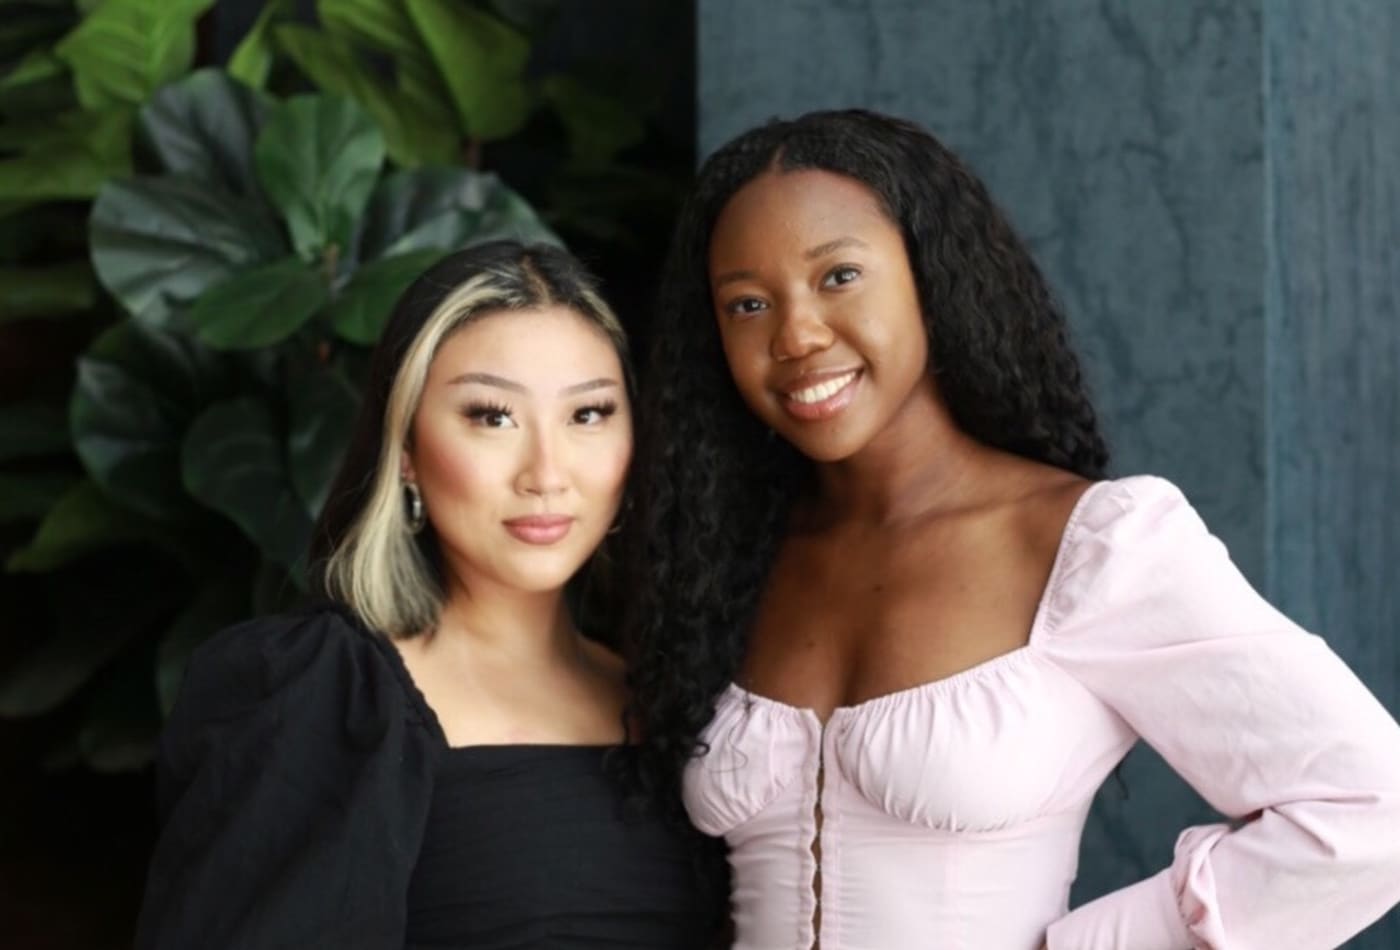 Claudia Teng and Olamide Olowe are the co-founders of Topicals